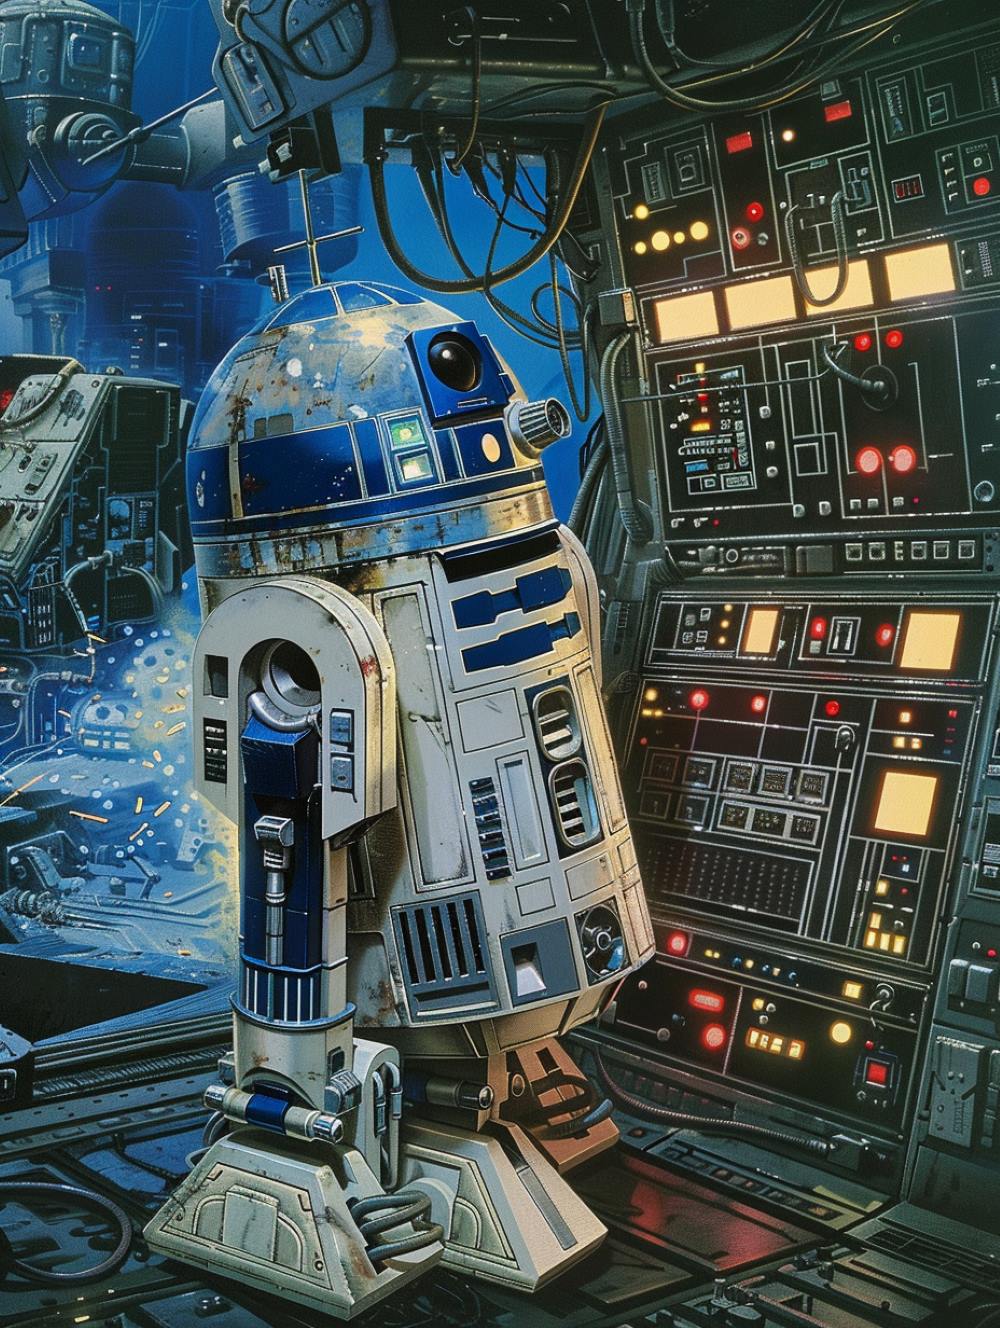 R2-D2 is standing next to a control board